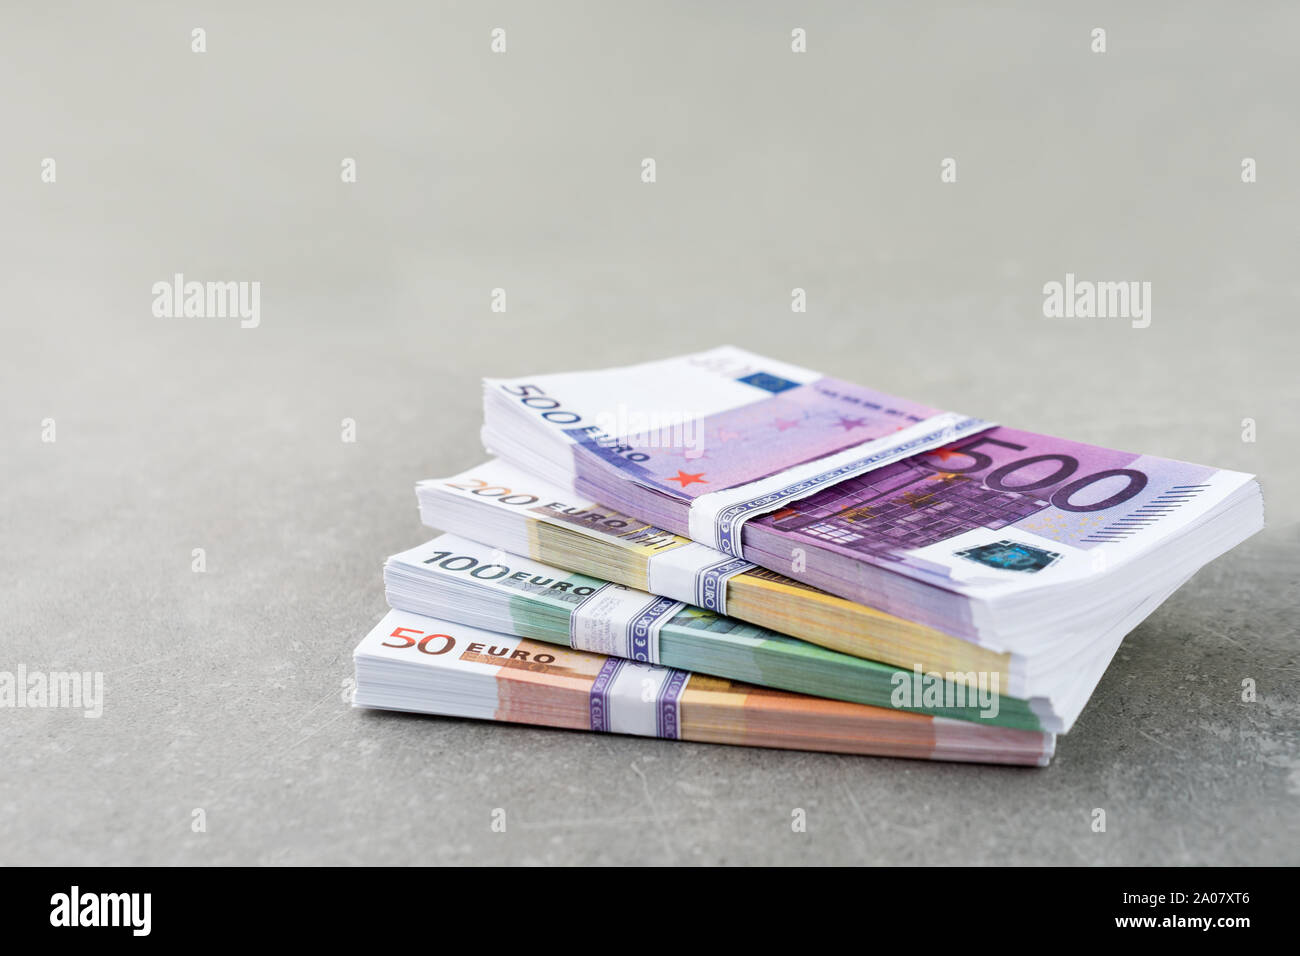 Euro currency money. Cash money, euro bills. Stacks of Euro notes on concrete background in five hundred, two hundreds, one hundreds and fifties Stock Photo